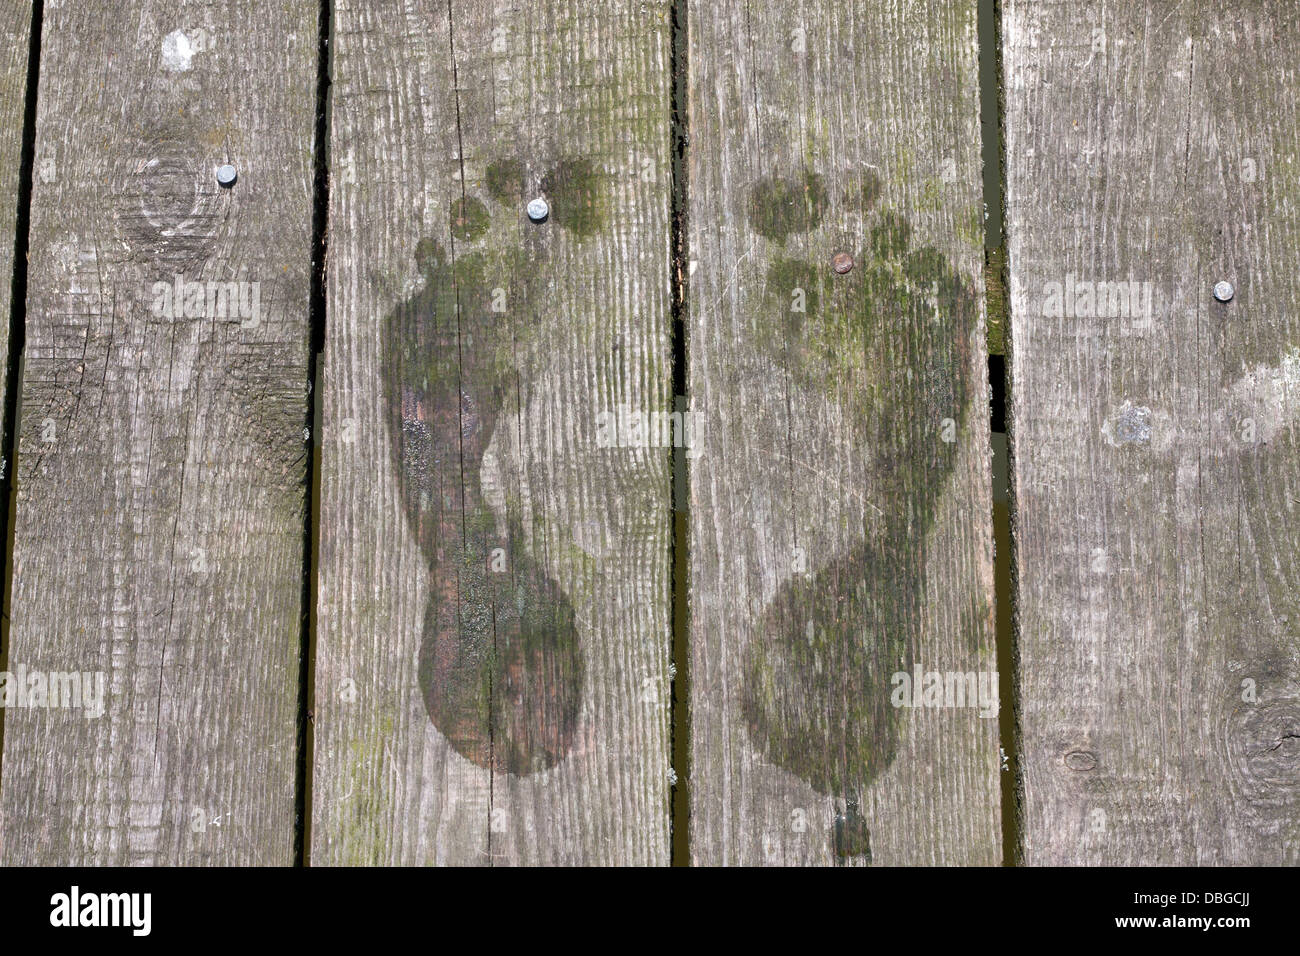 Footprints on pier on wooden boards holiday background sign Stock Photo